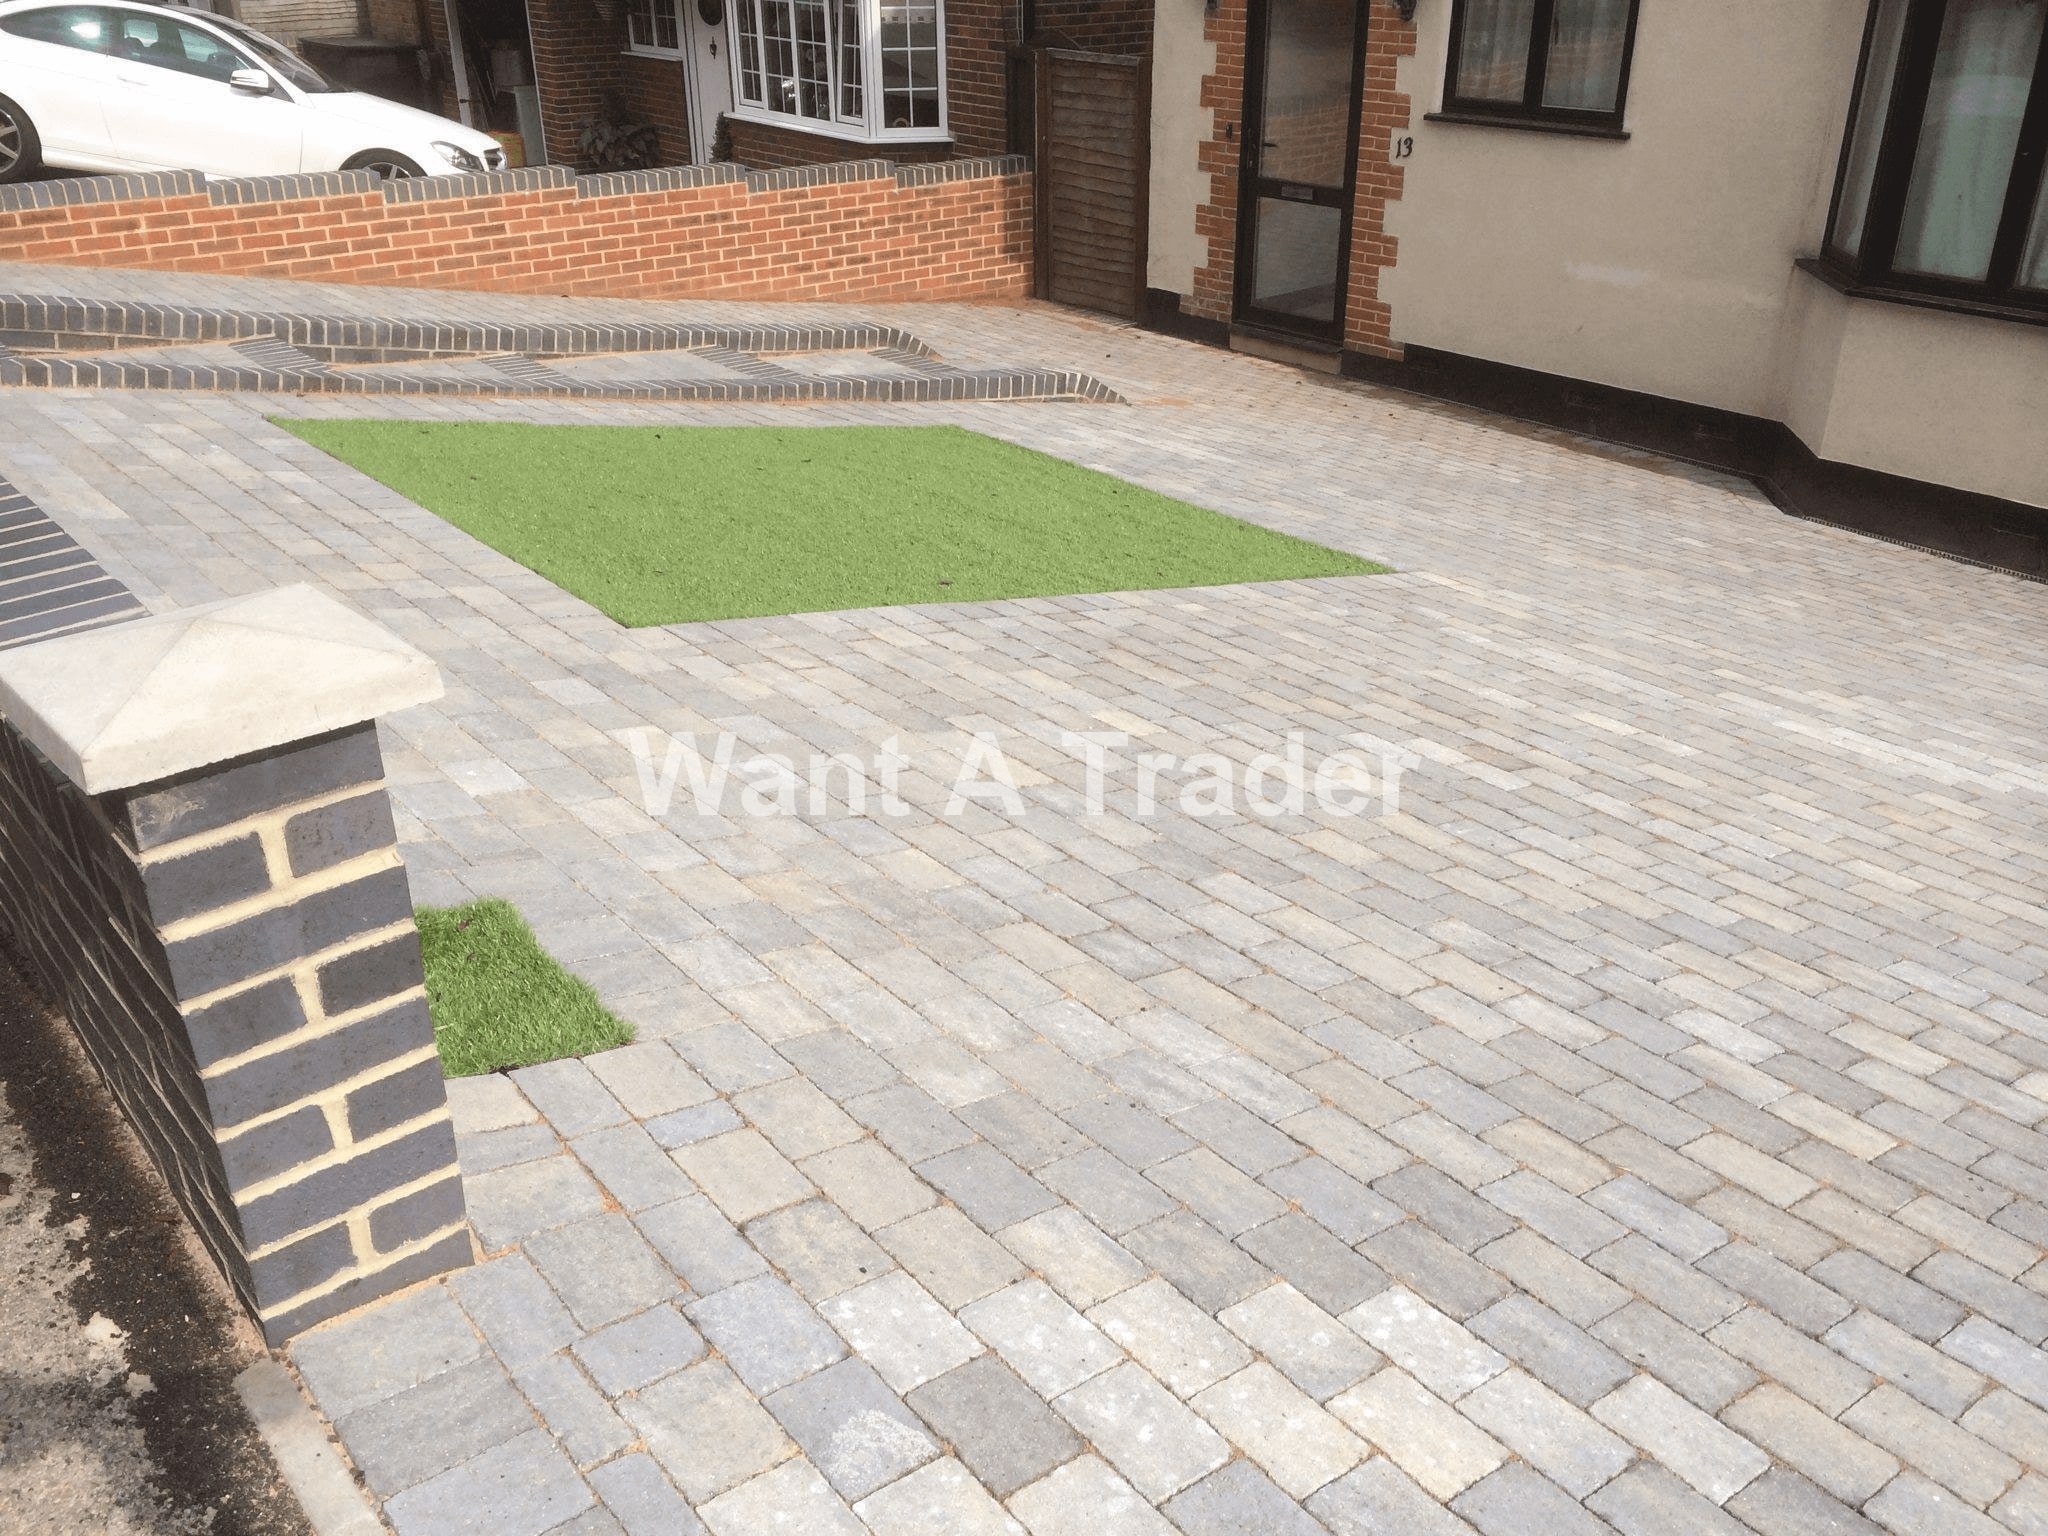 Driveway Design and Installation Company Dulwich SE21